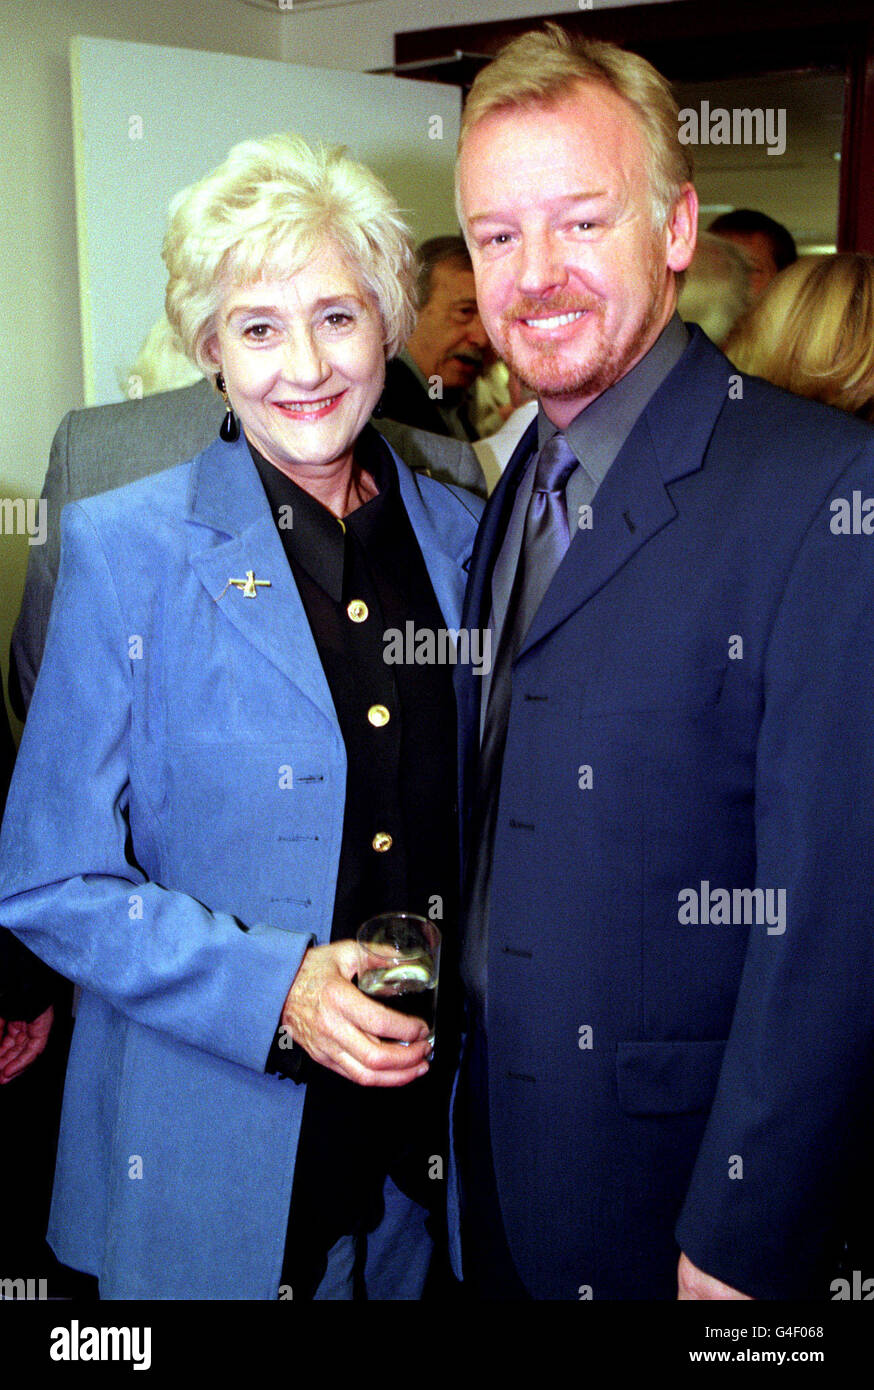 PA NEWS PHOTO 11/10/98 ACTRESS LIZ FRASER AND COMEDIAN LES DENNIS AT BBC BROADCASTING HOUSE IN LONDON, WHERE A SERIES OF PLAQUES COMMEMORATING GREAT BRITISH COMEDIANS WERE UNVEILED BY COMIC HERITAGE. Stock Photo